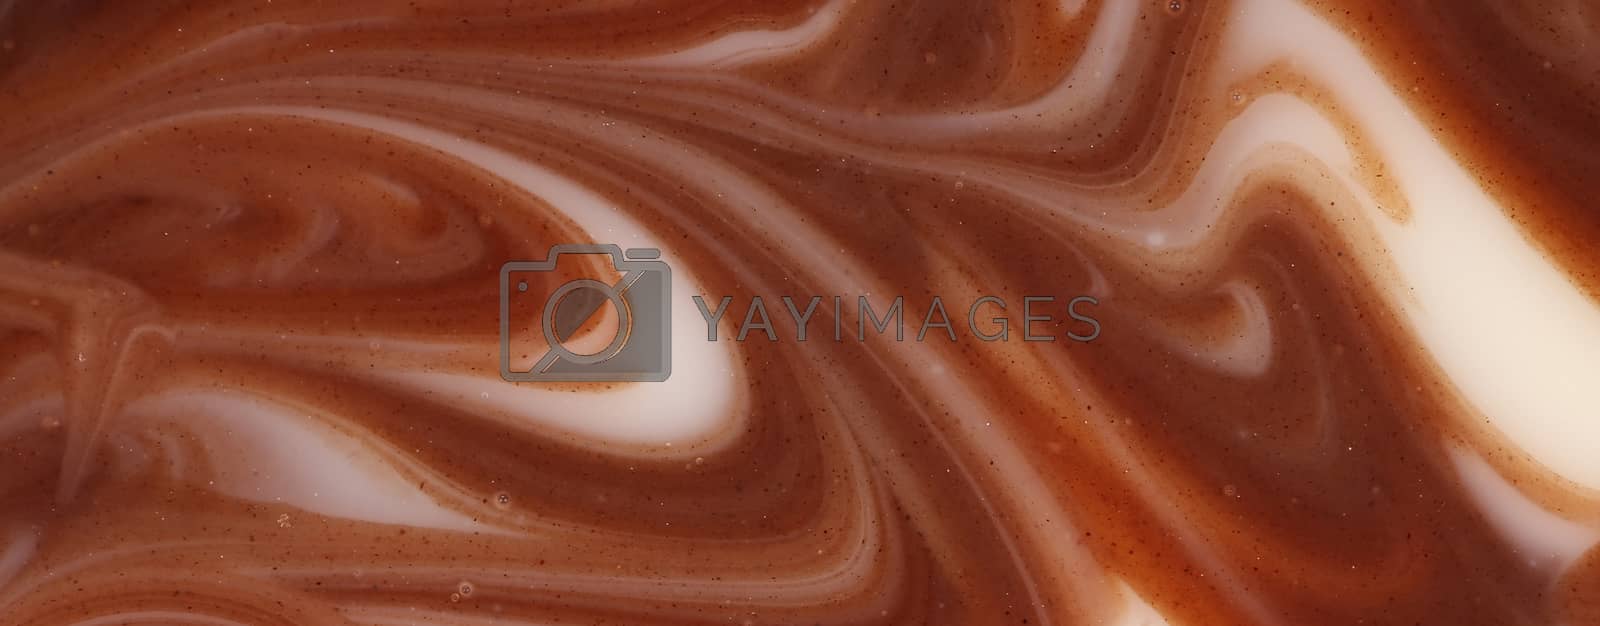 Royalty free image of Twisted chocolate mixed texture. by indigolotos